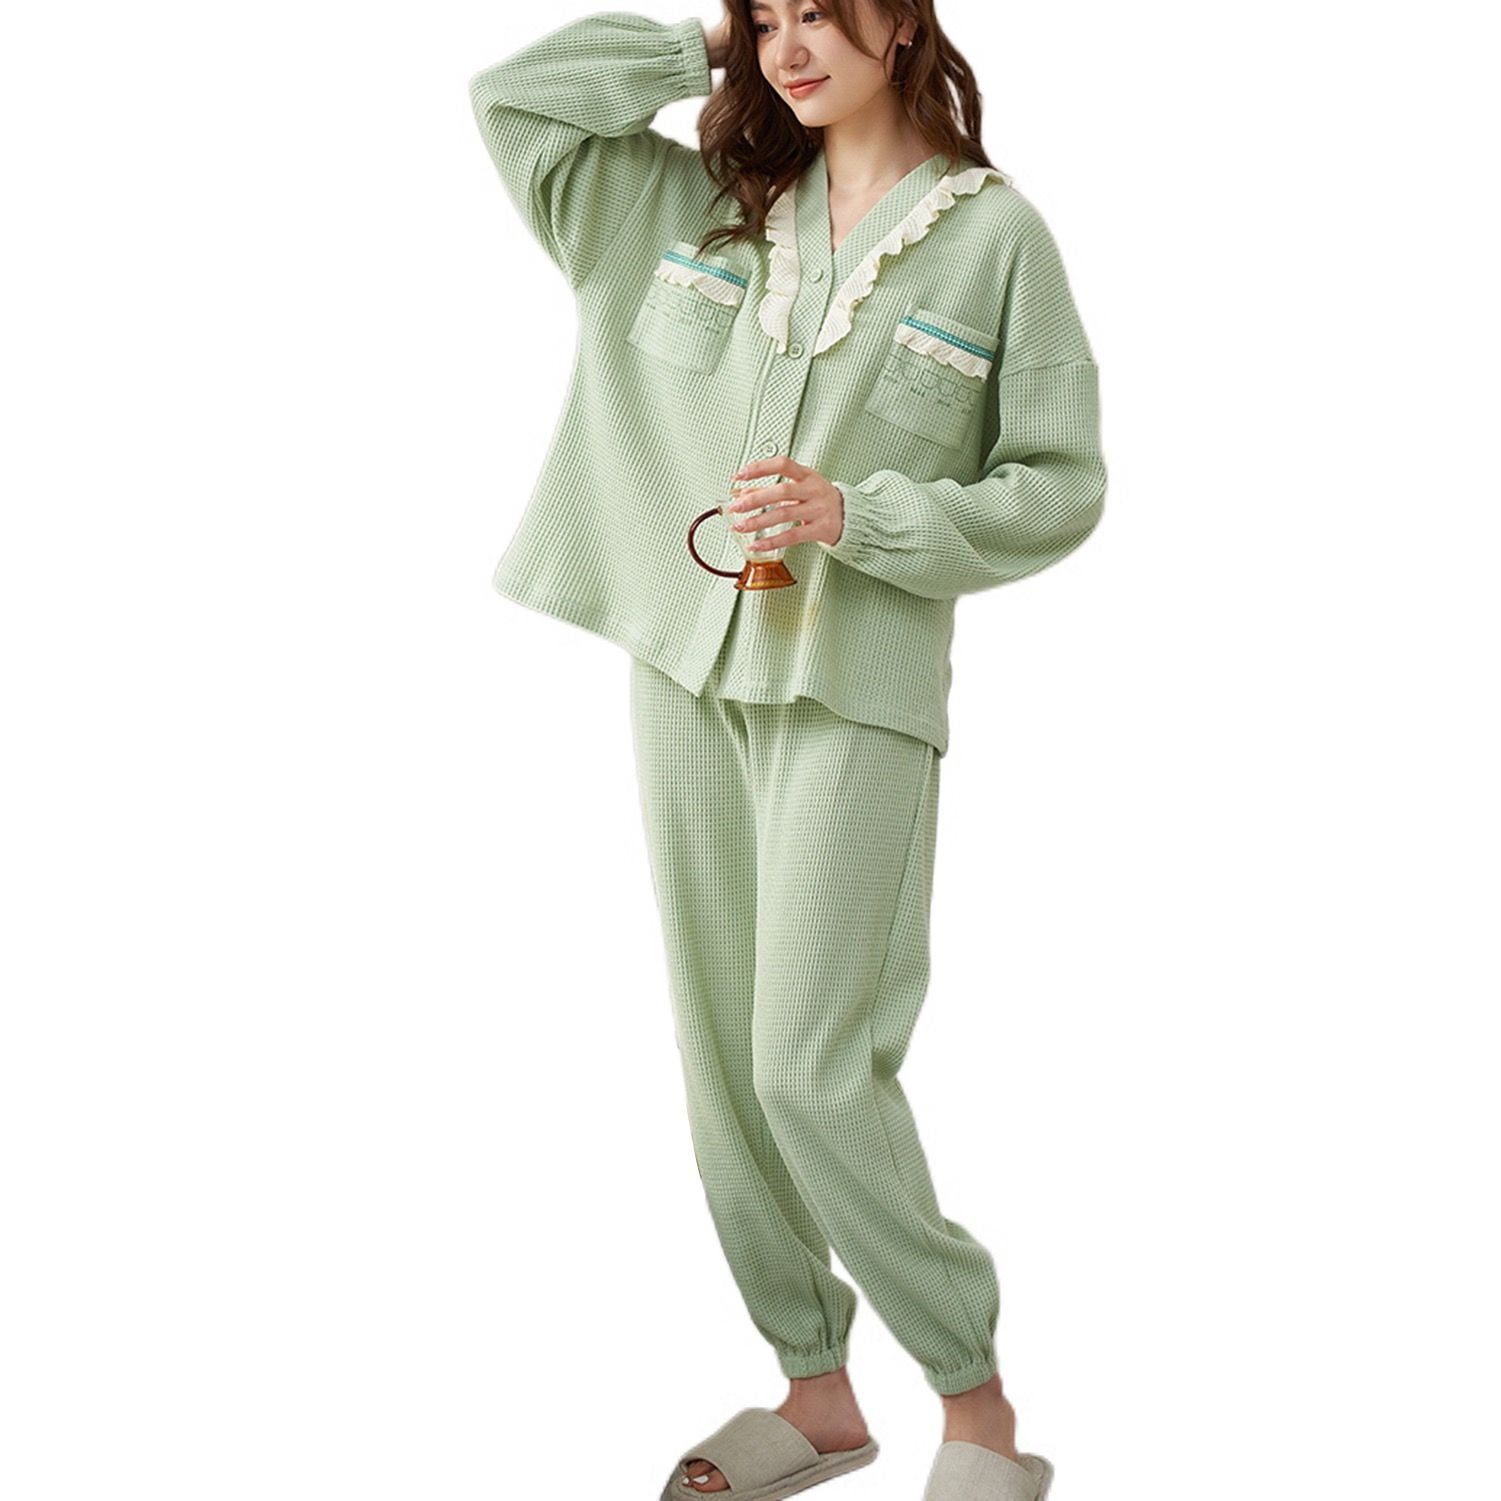 Shop Women's Open Back Top & Pull-On Pant Waffle Knit Pajama Set